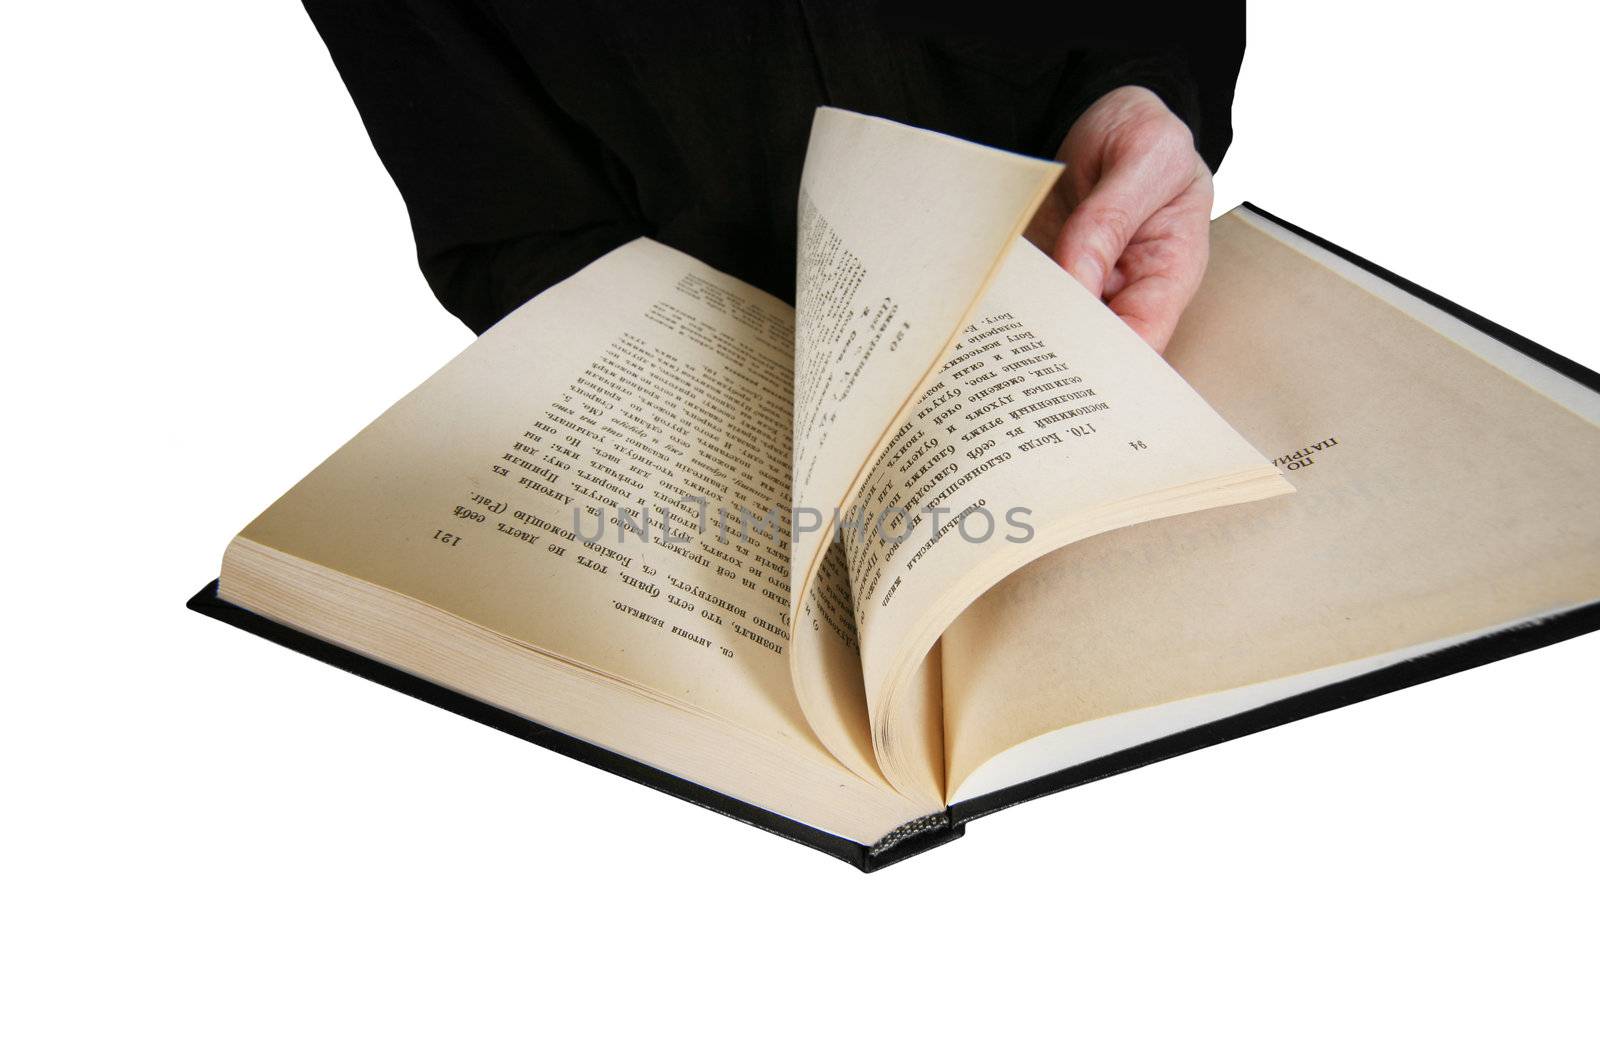 The male hand holds the open book